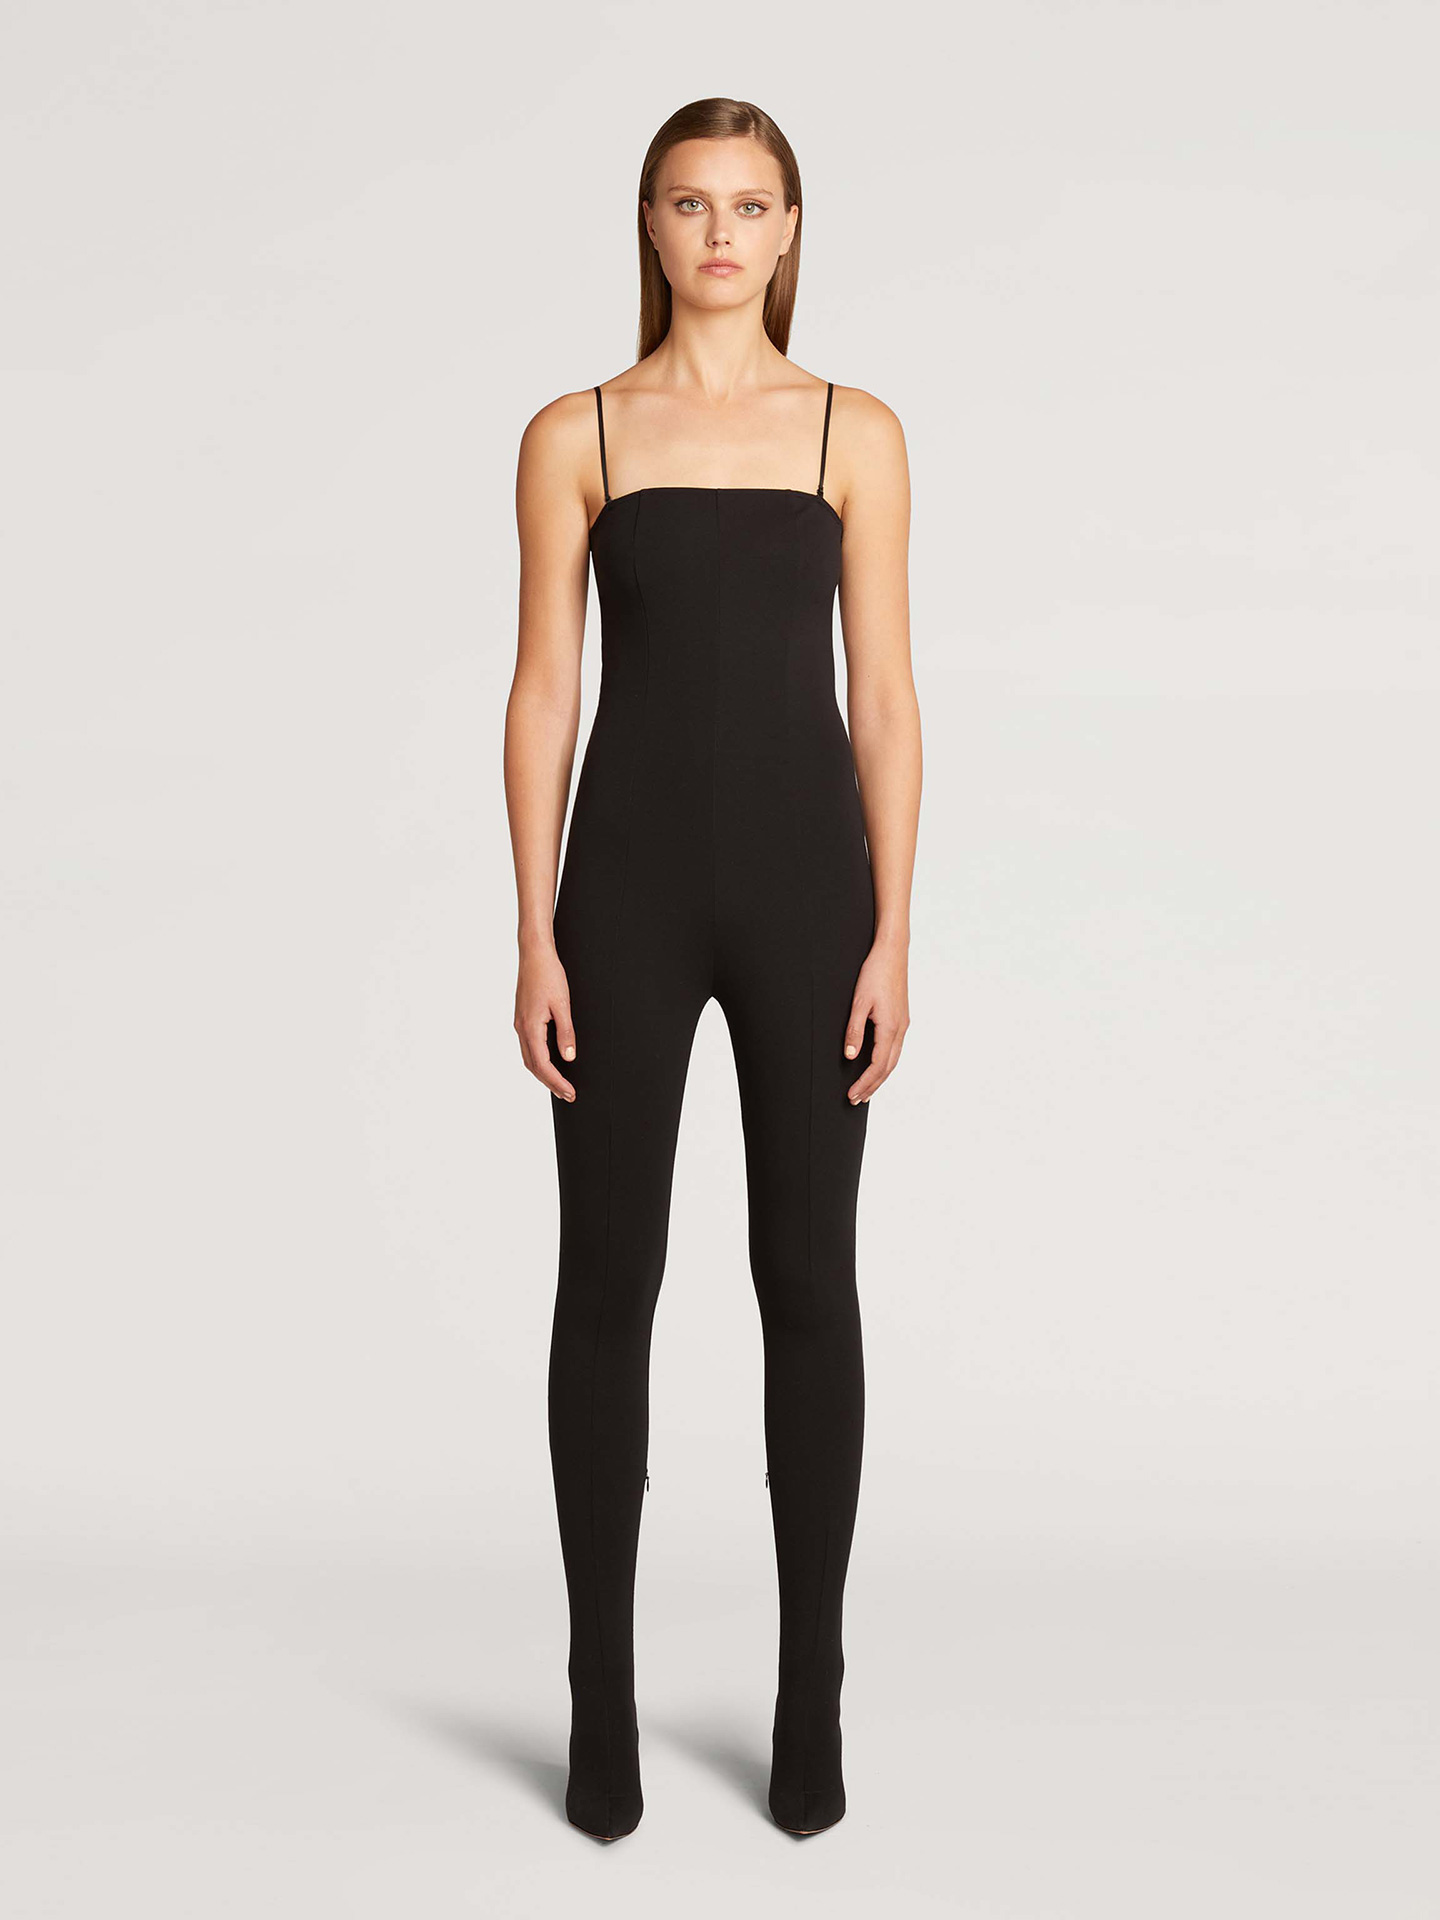 Wolford - Catsuit with shoes, Frau, black, Größe: M37 von Wolford